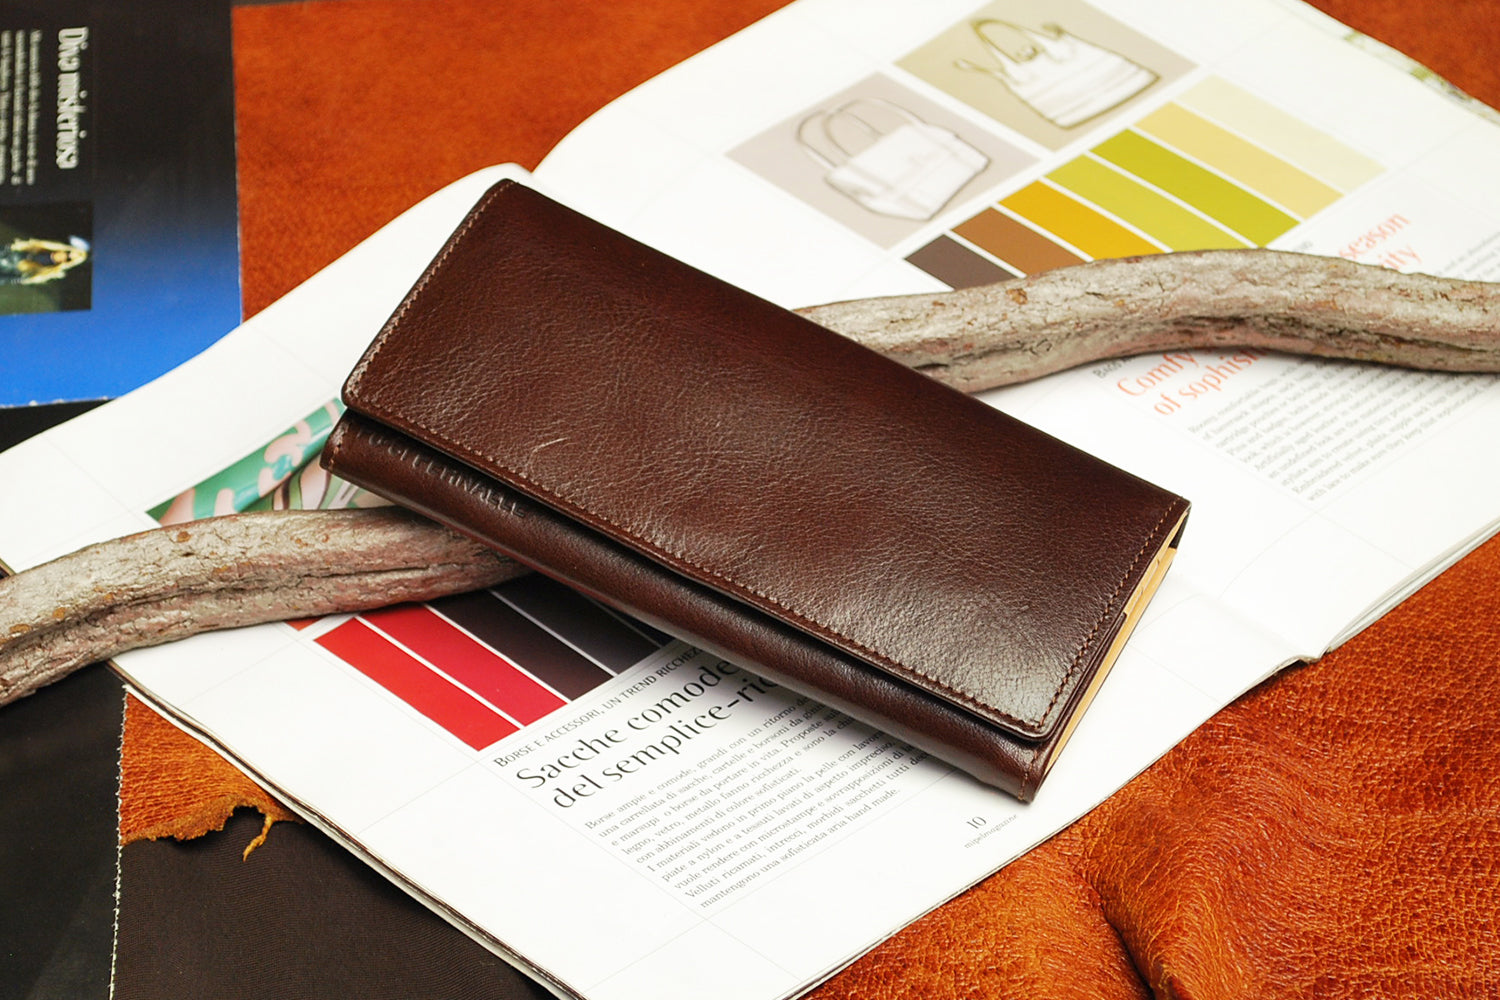 FU-SI FERNALLE / OLFAS Fits comfortably in your hand. A long wallet made of high-quality Italian leather with a rich taste